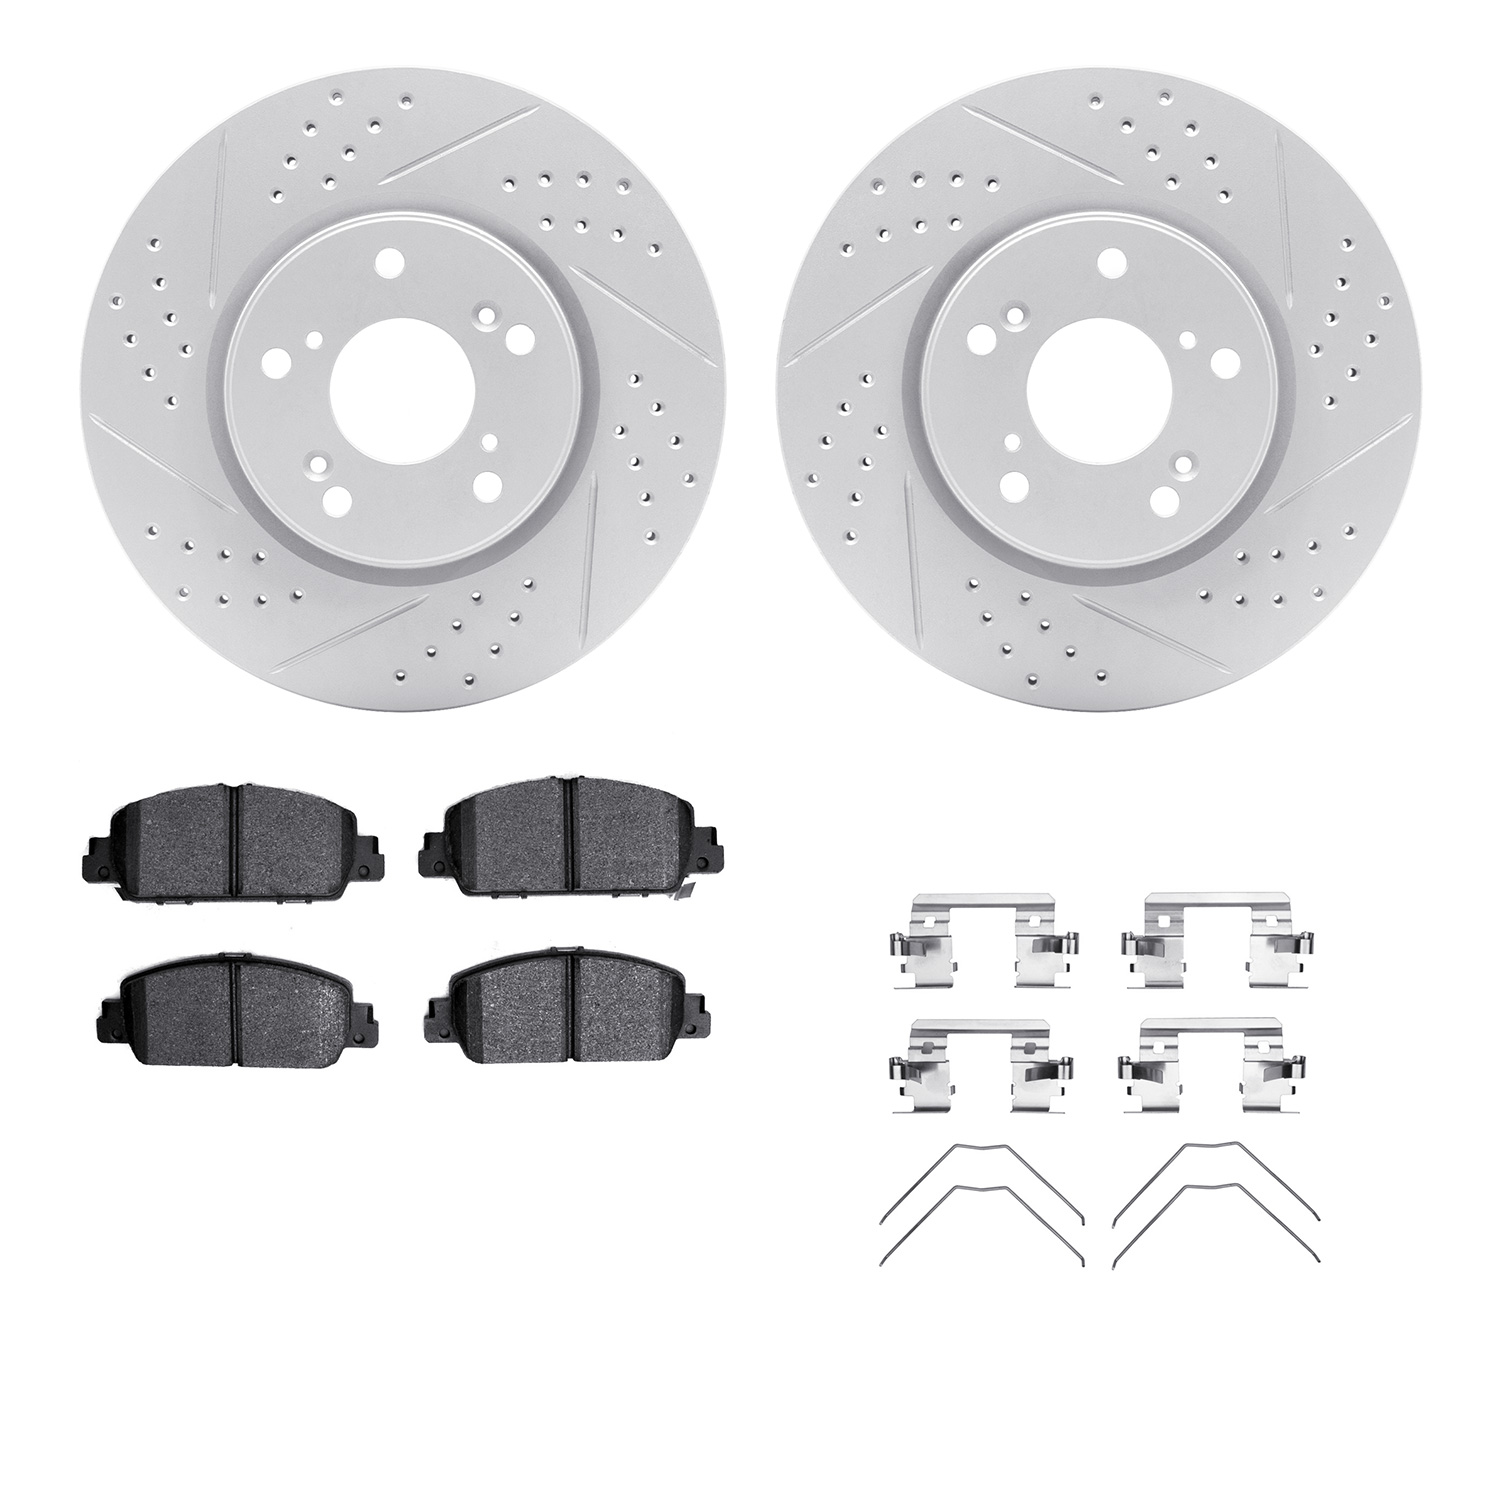 2512-59045 Geoperformance Drilled/Slotted Rotors w/5000 Advanced Brake Pads Kit & Hardware, 2014-2017 Acura/Honda, Position: Fro